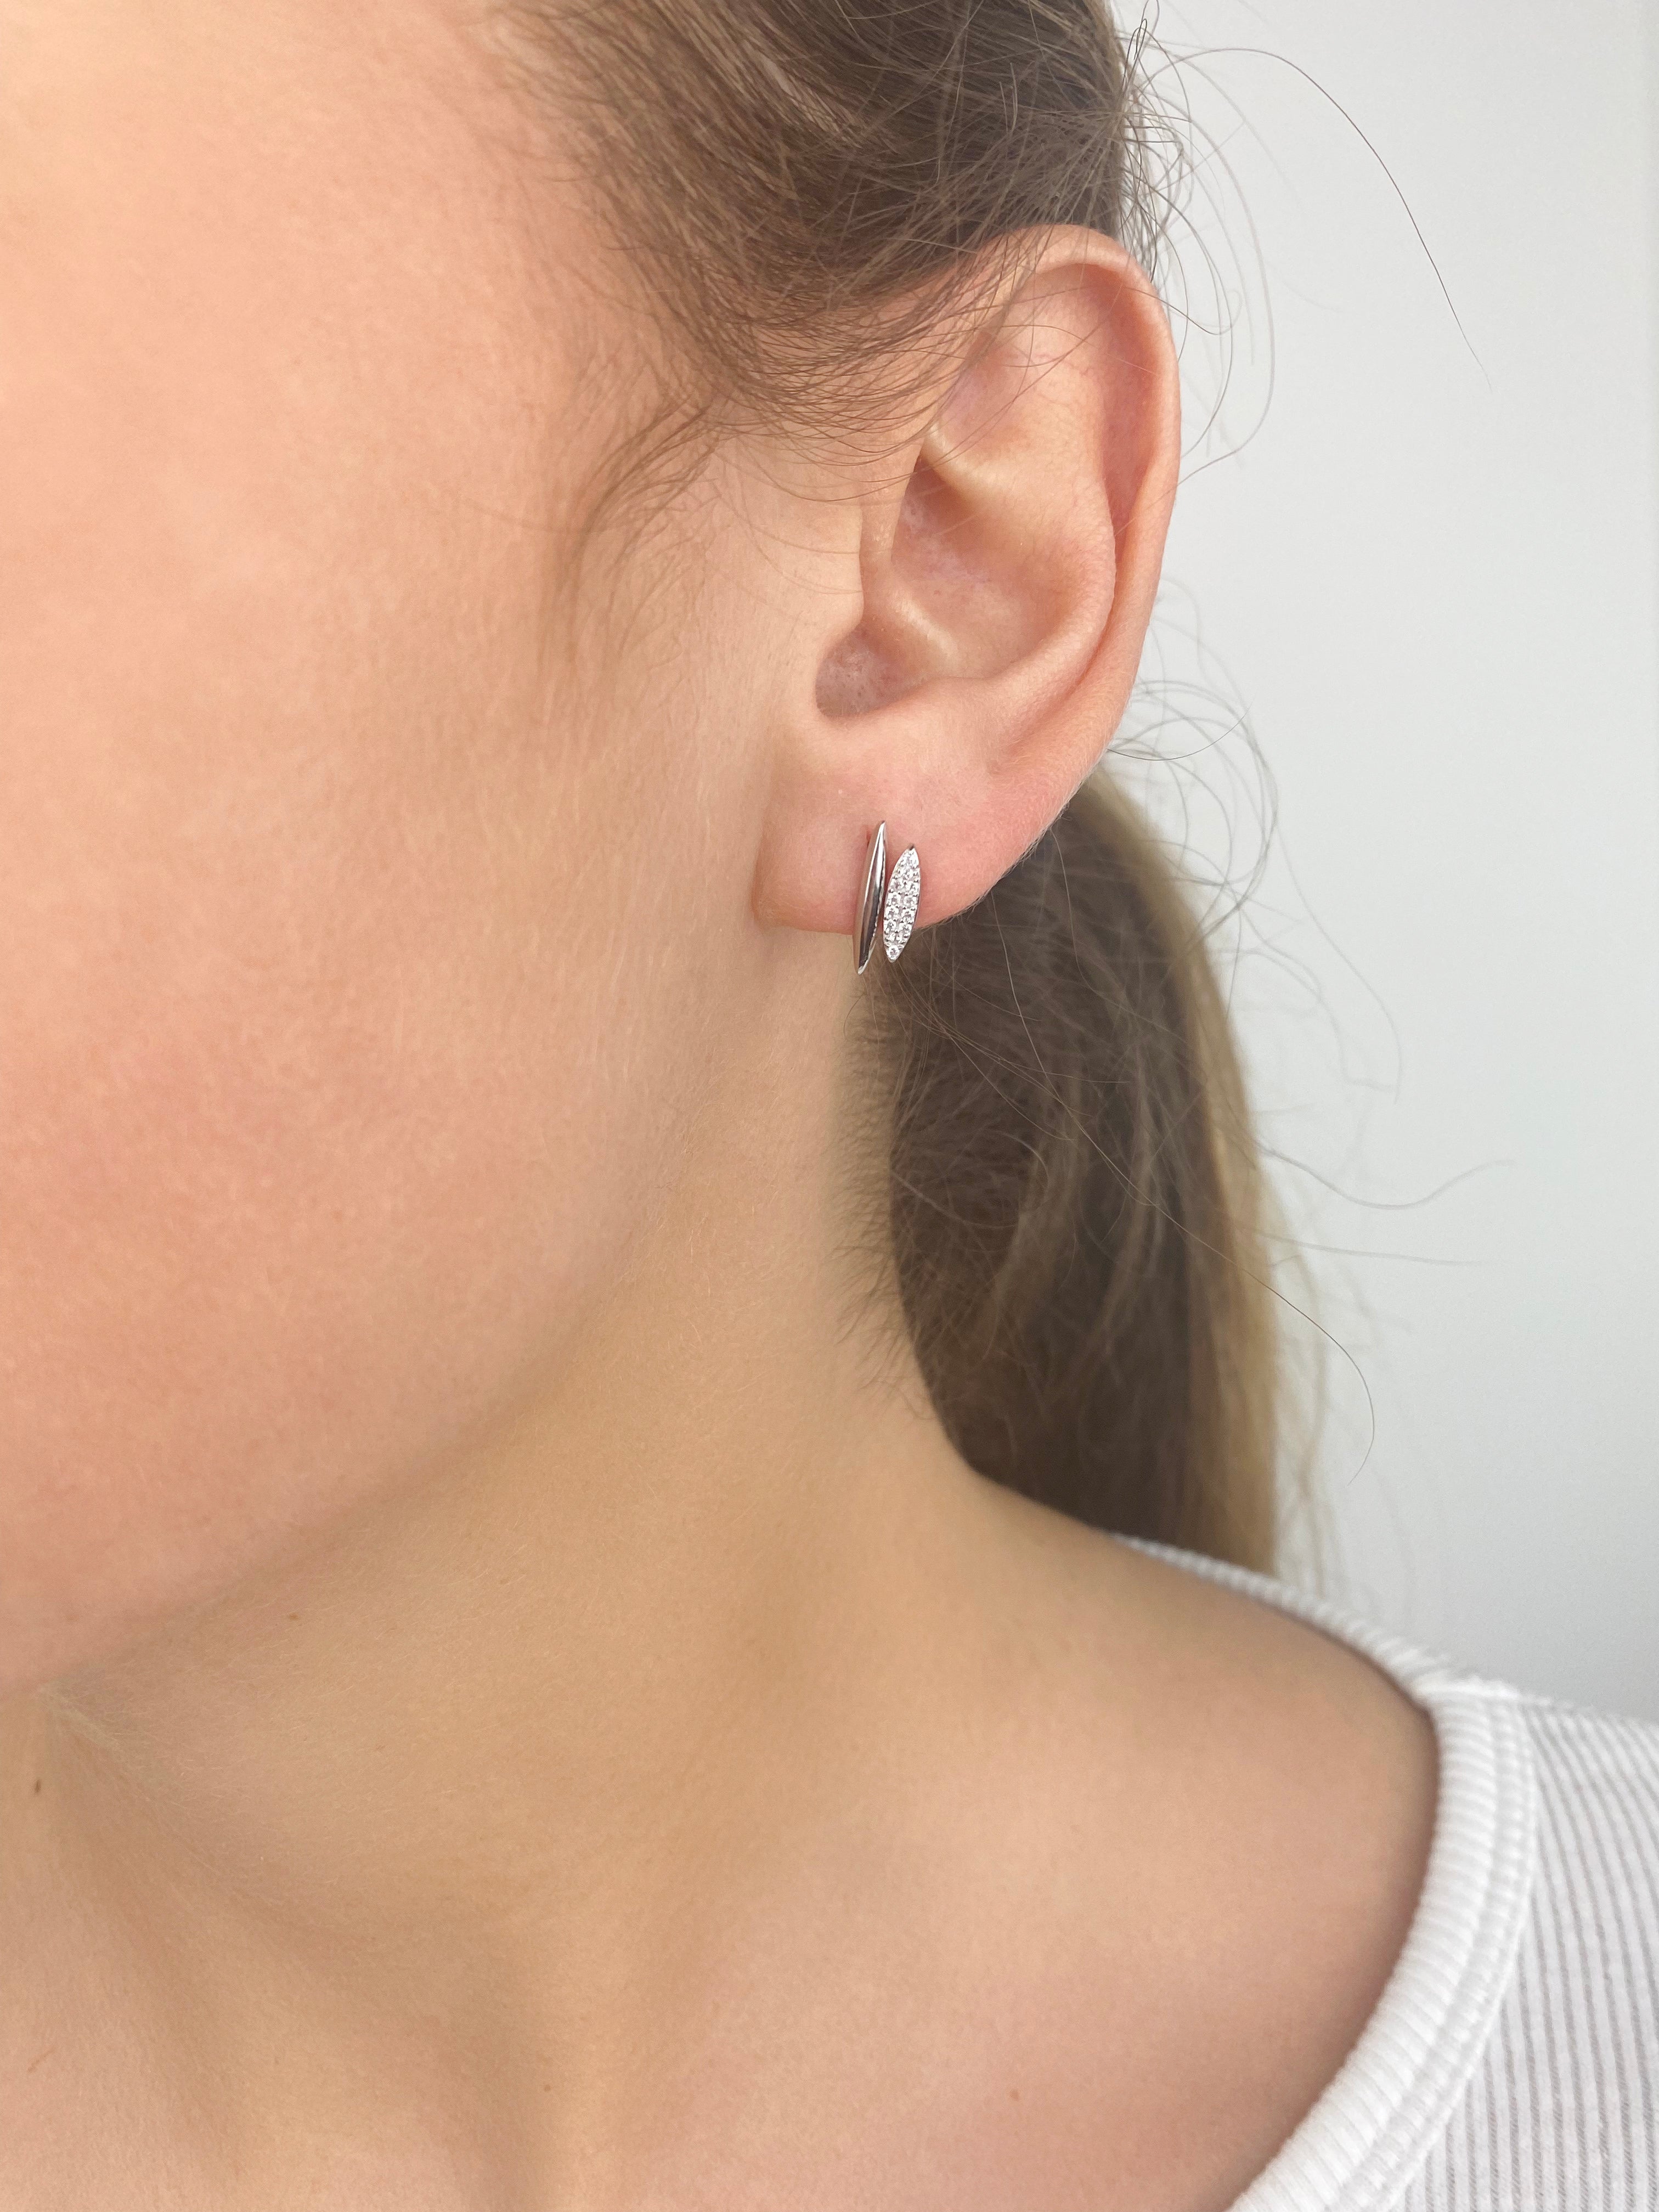 Illusion Stud Earrings in Gold